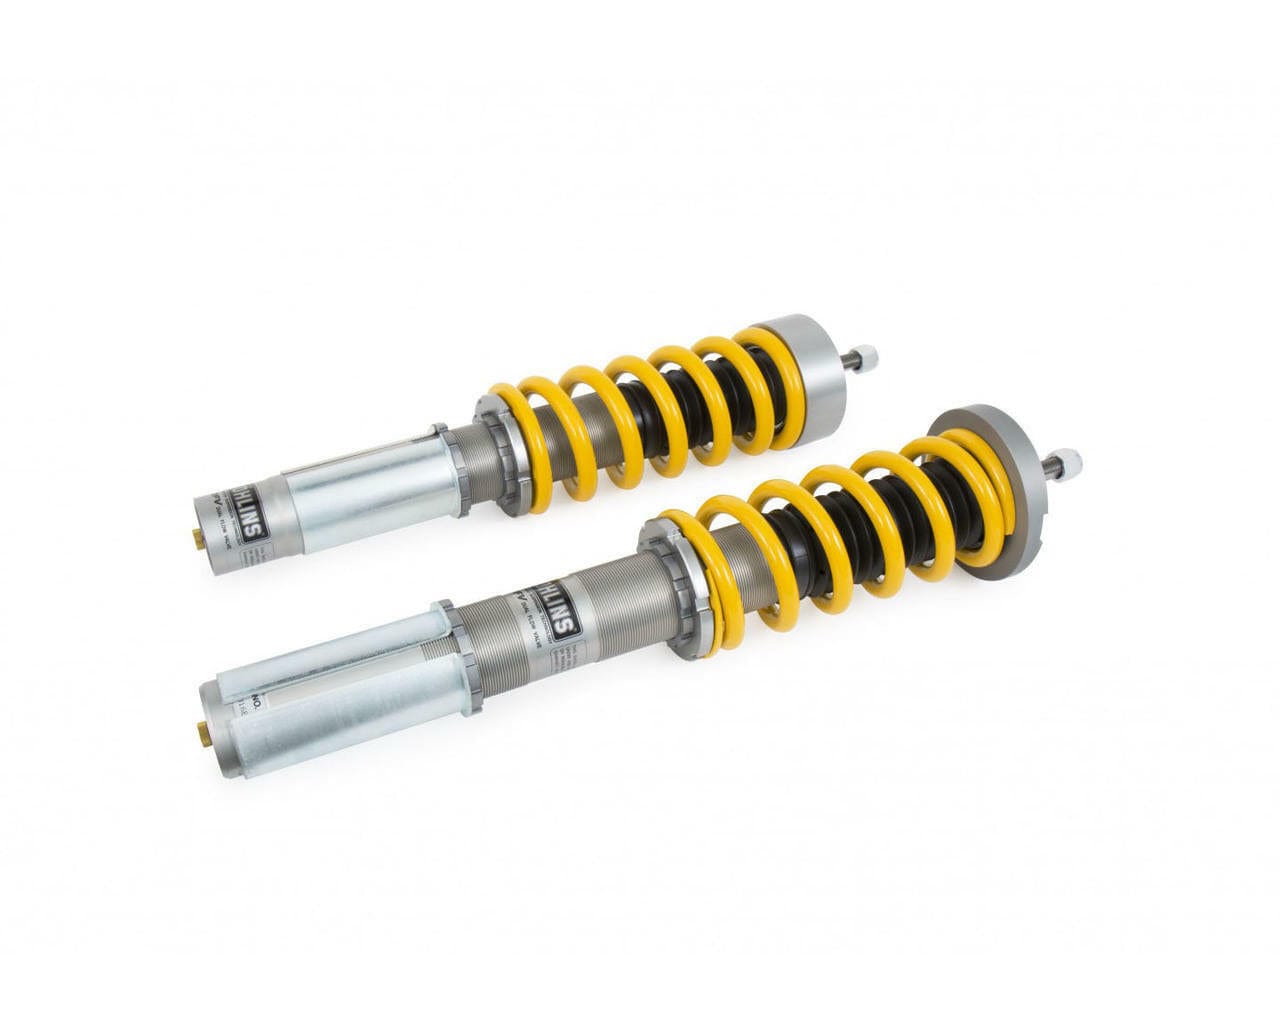 Ohlins Road & Track Coilovers for 2017-2021 Porsche Boxster 718 (982) POS MP80S1